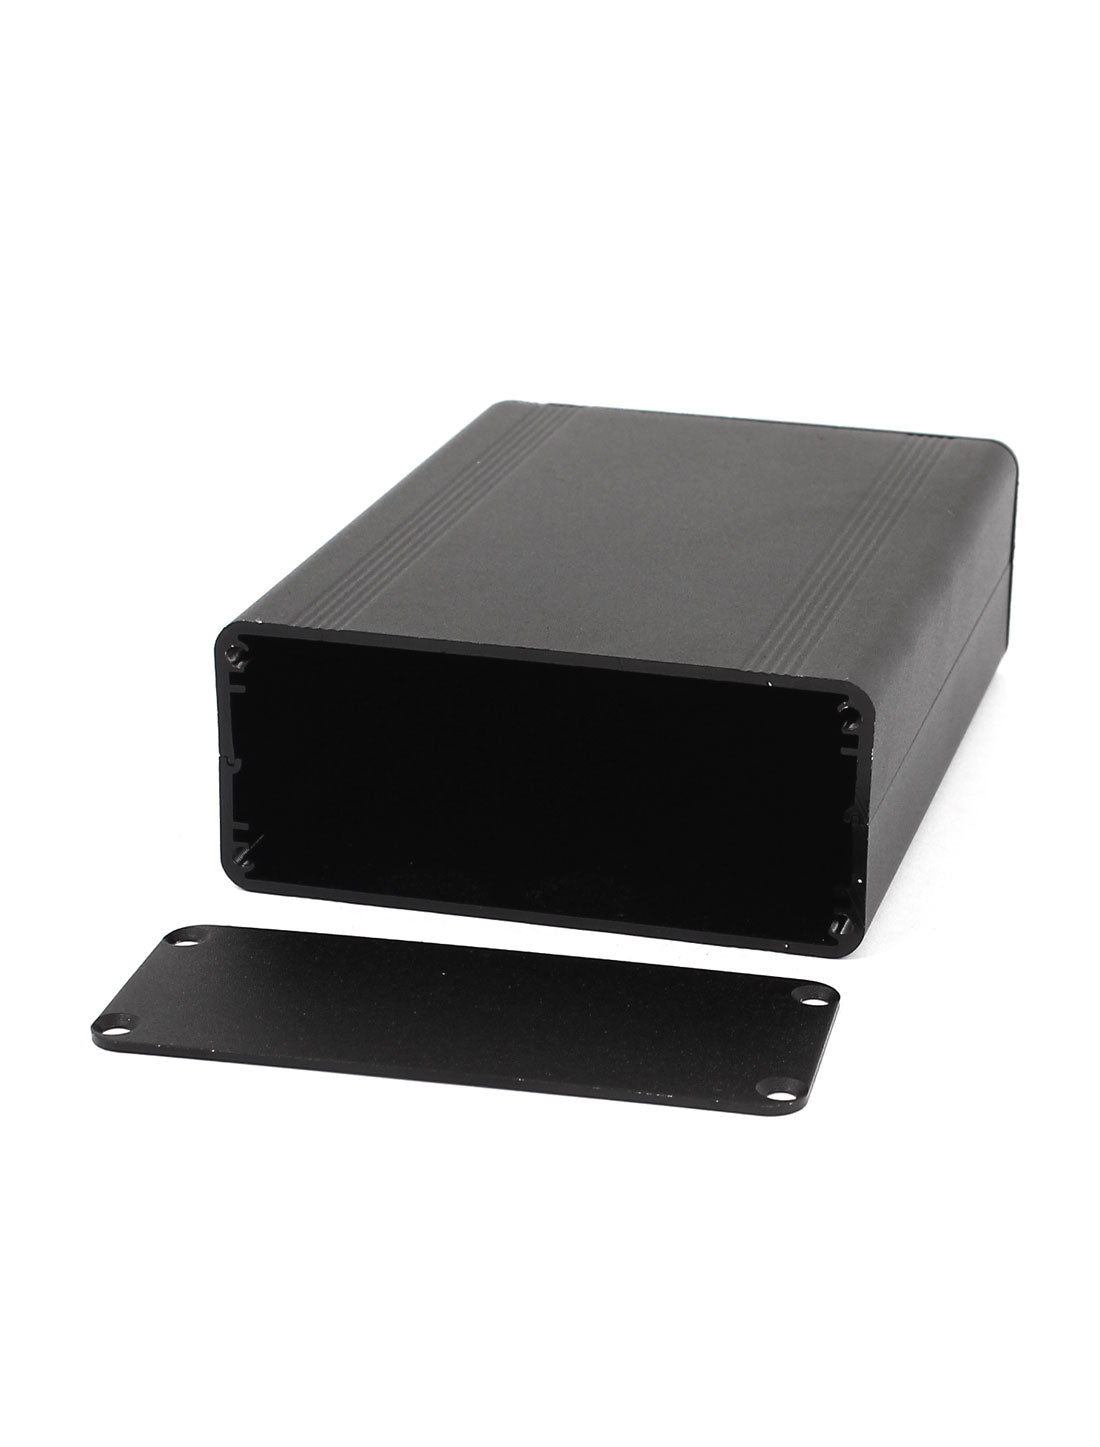 uxcell Uxcell Aluminum Project Box Enclosure Case Electronic Power DIY 120x88x38mm Black